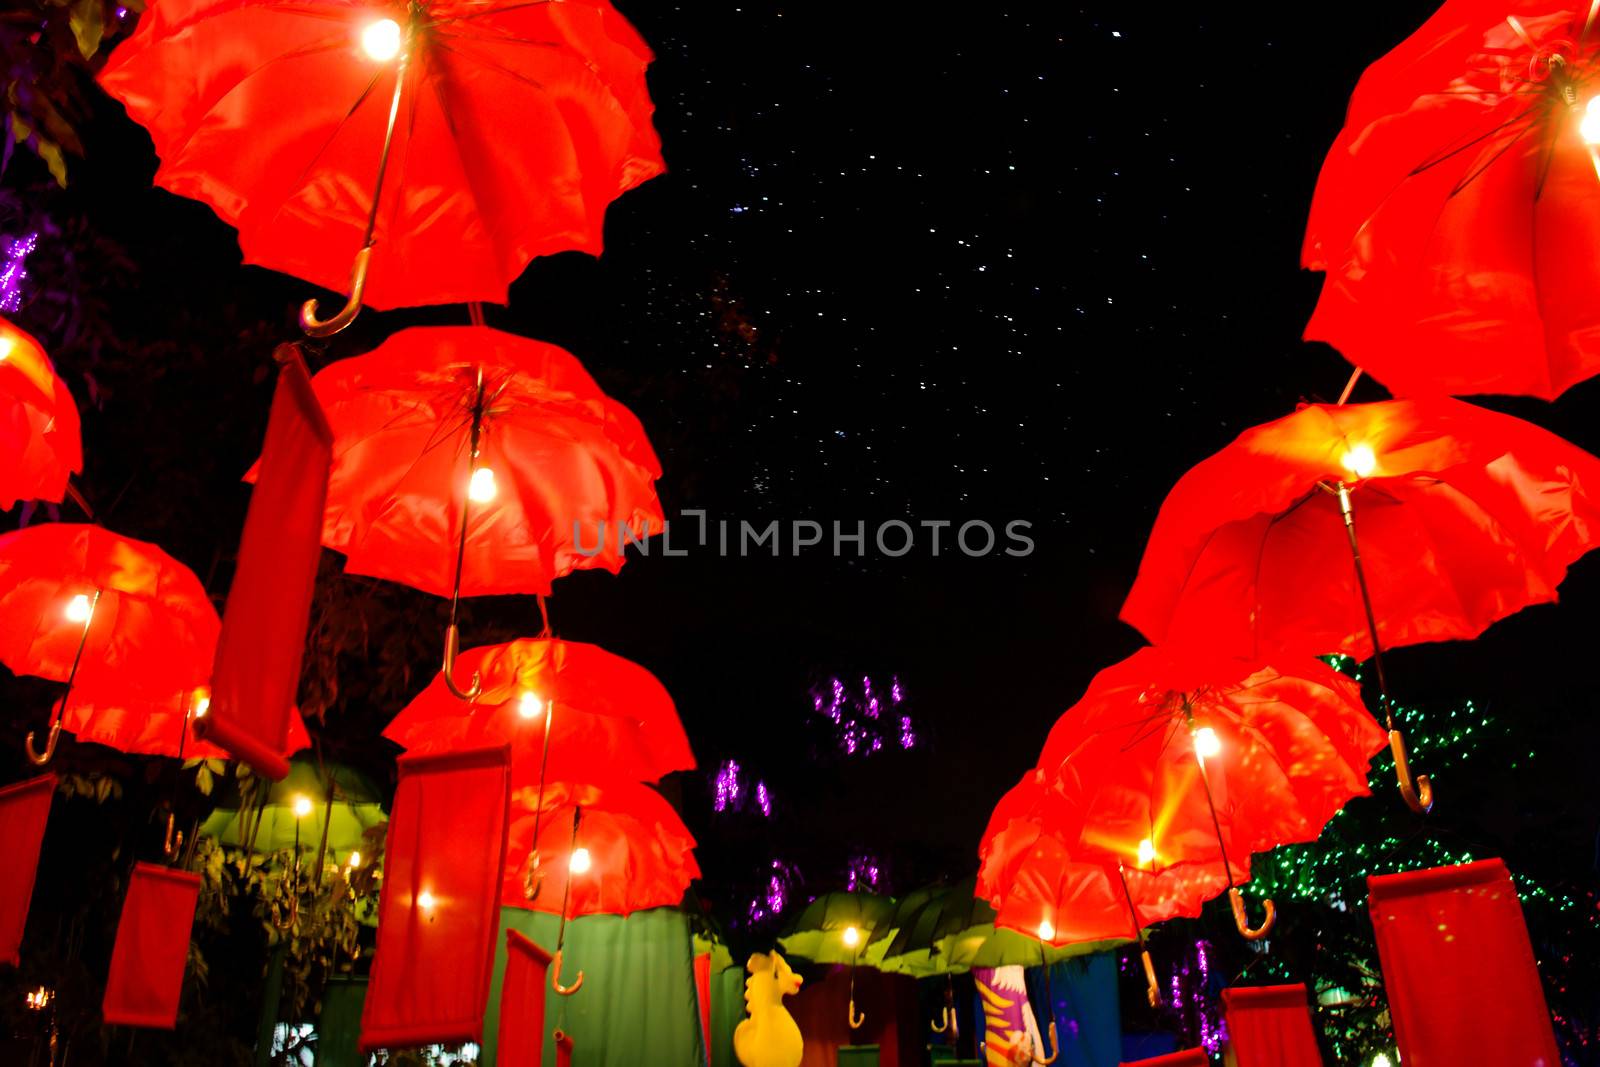 Red umbrella in the night sky with colorful light